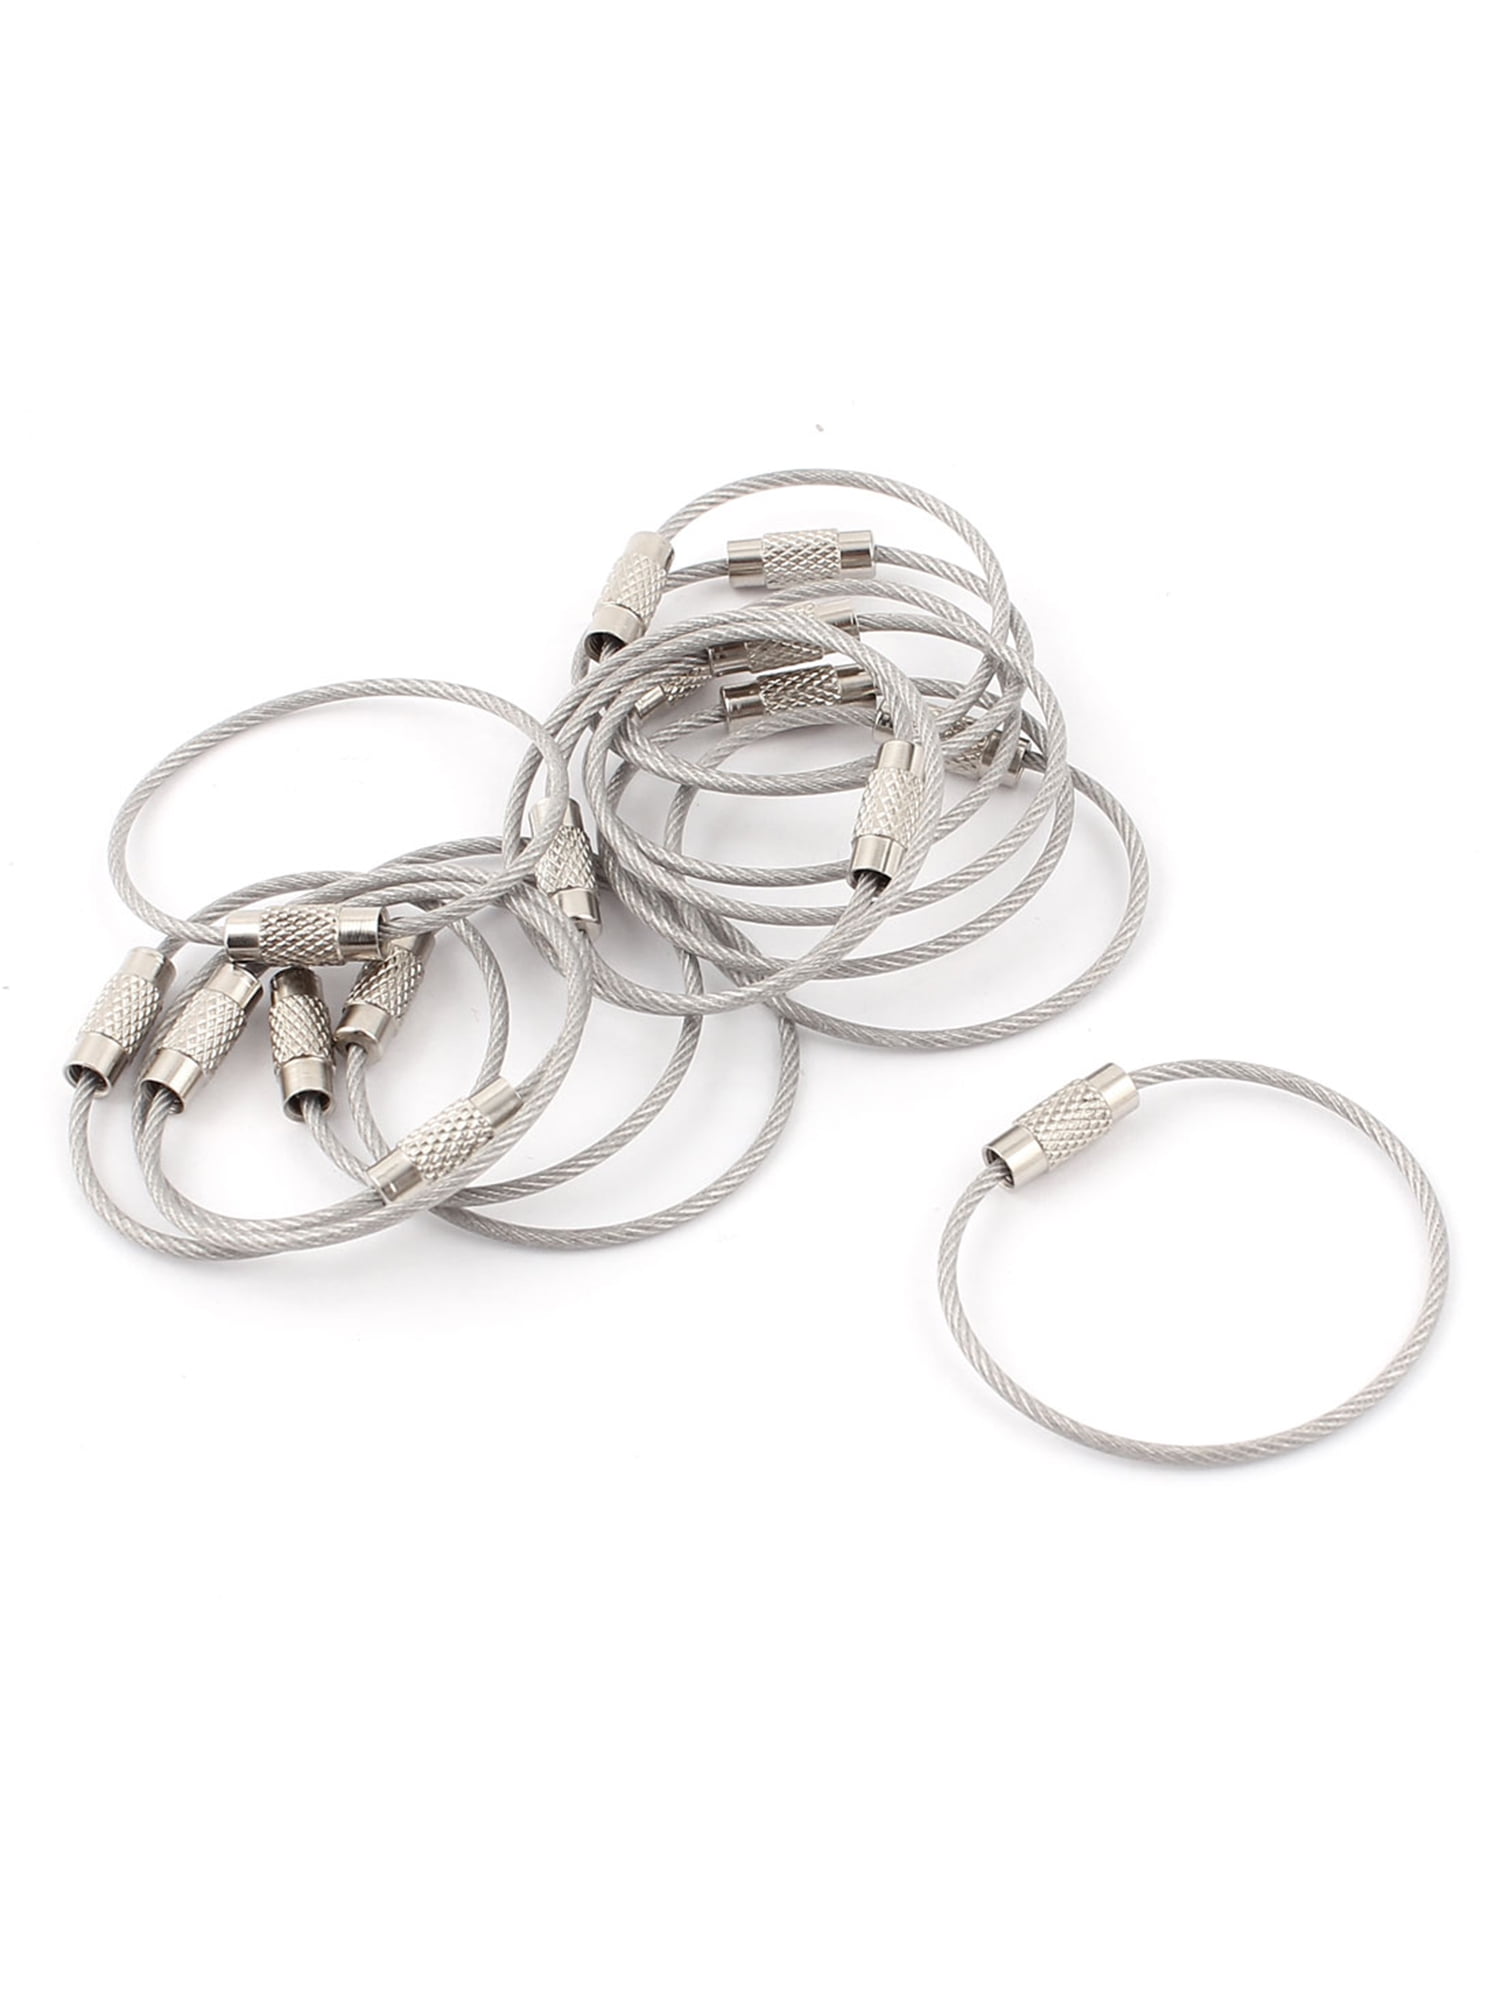 Keychain Pack of 20-6.3 inch Keyrings and ID Tag Keepers Wisdompro 20 Pack of 6.3 Inches Stainless Steel Wire Ring 2mm Cable Loop Rings for Hanging Luggage Tag